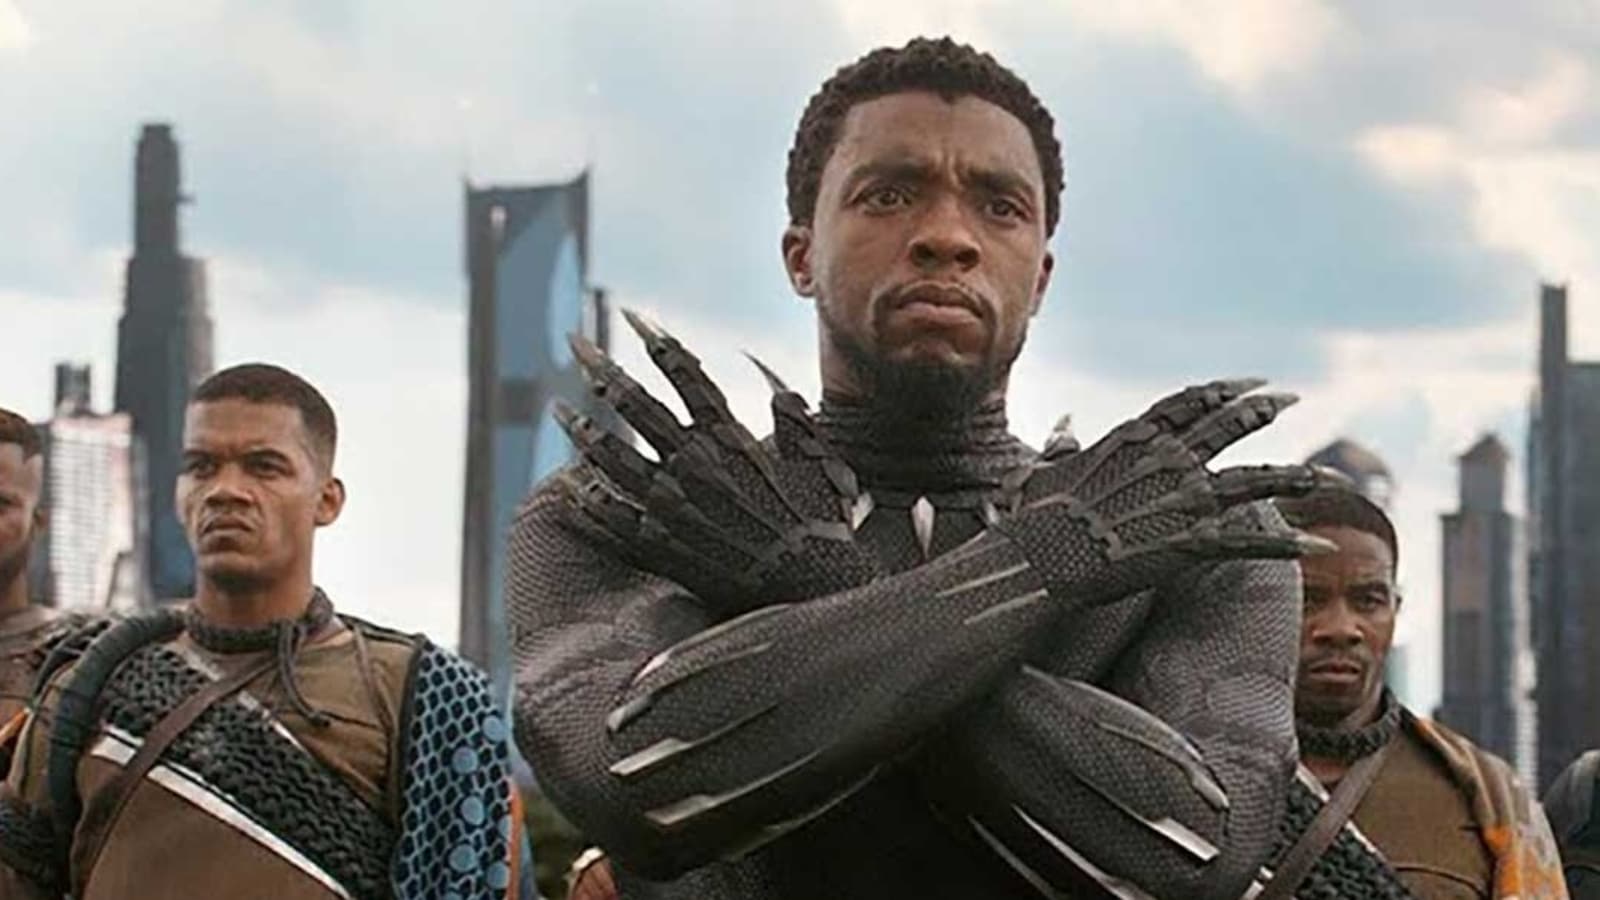 Why Kevin Feige didn’t recast Chadwick Boseman’s T’Challa in Black Panther sequel: ‘World is still processing the loss’